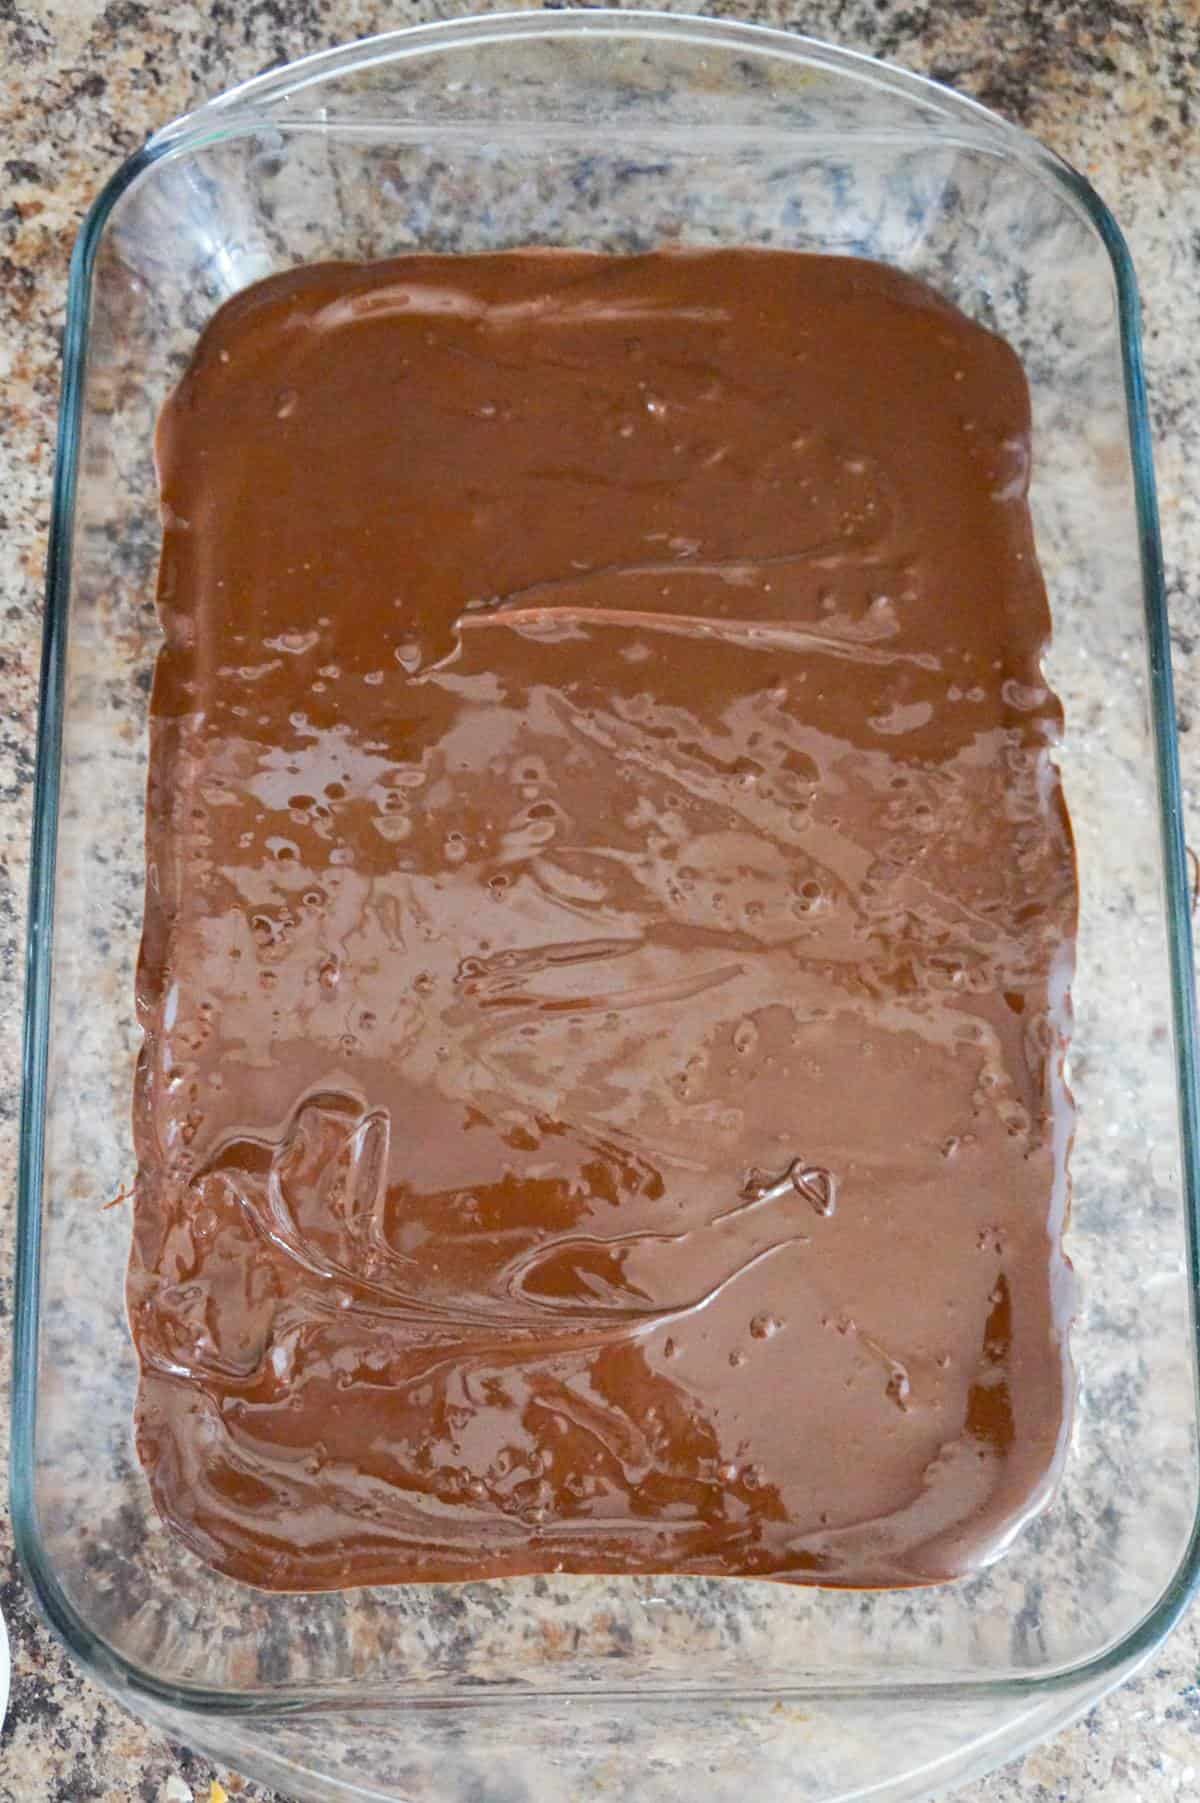 melted chocolate spread on top of peanut butter mixture in a baking dish